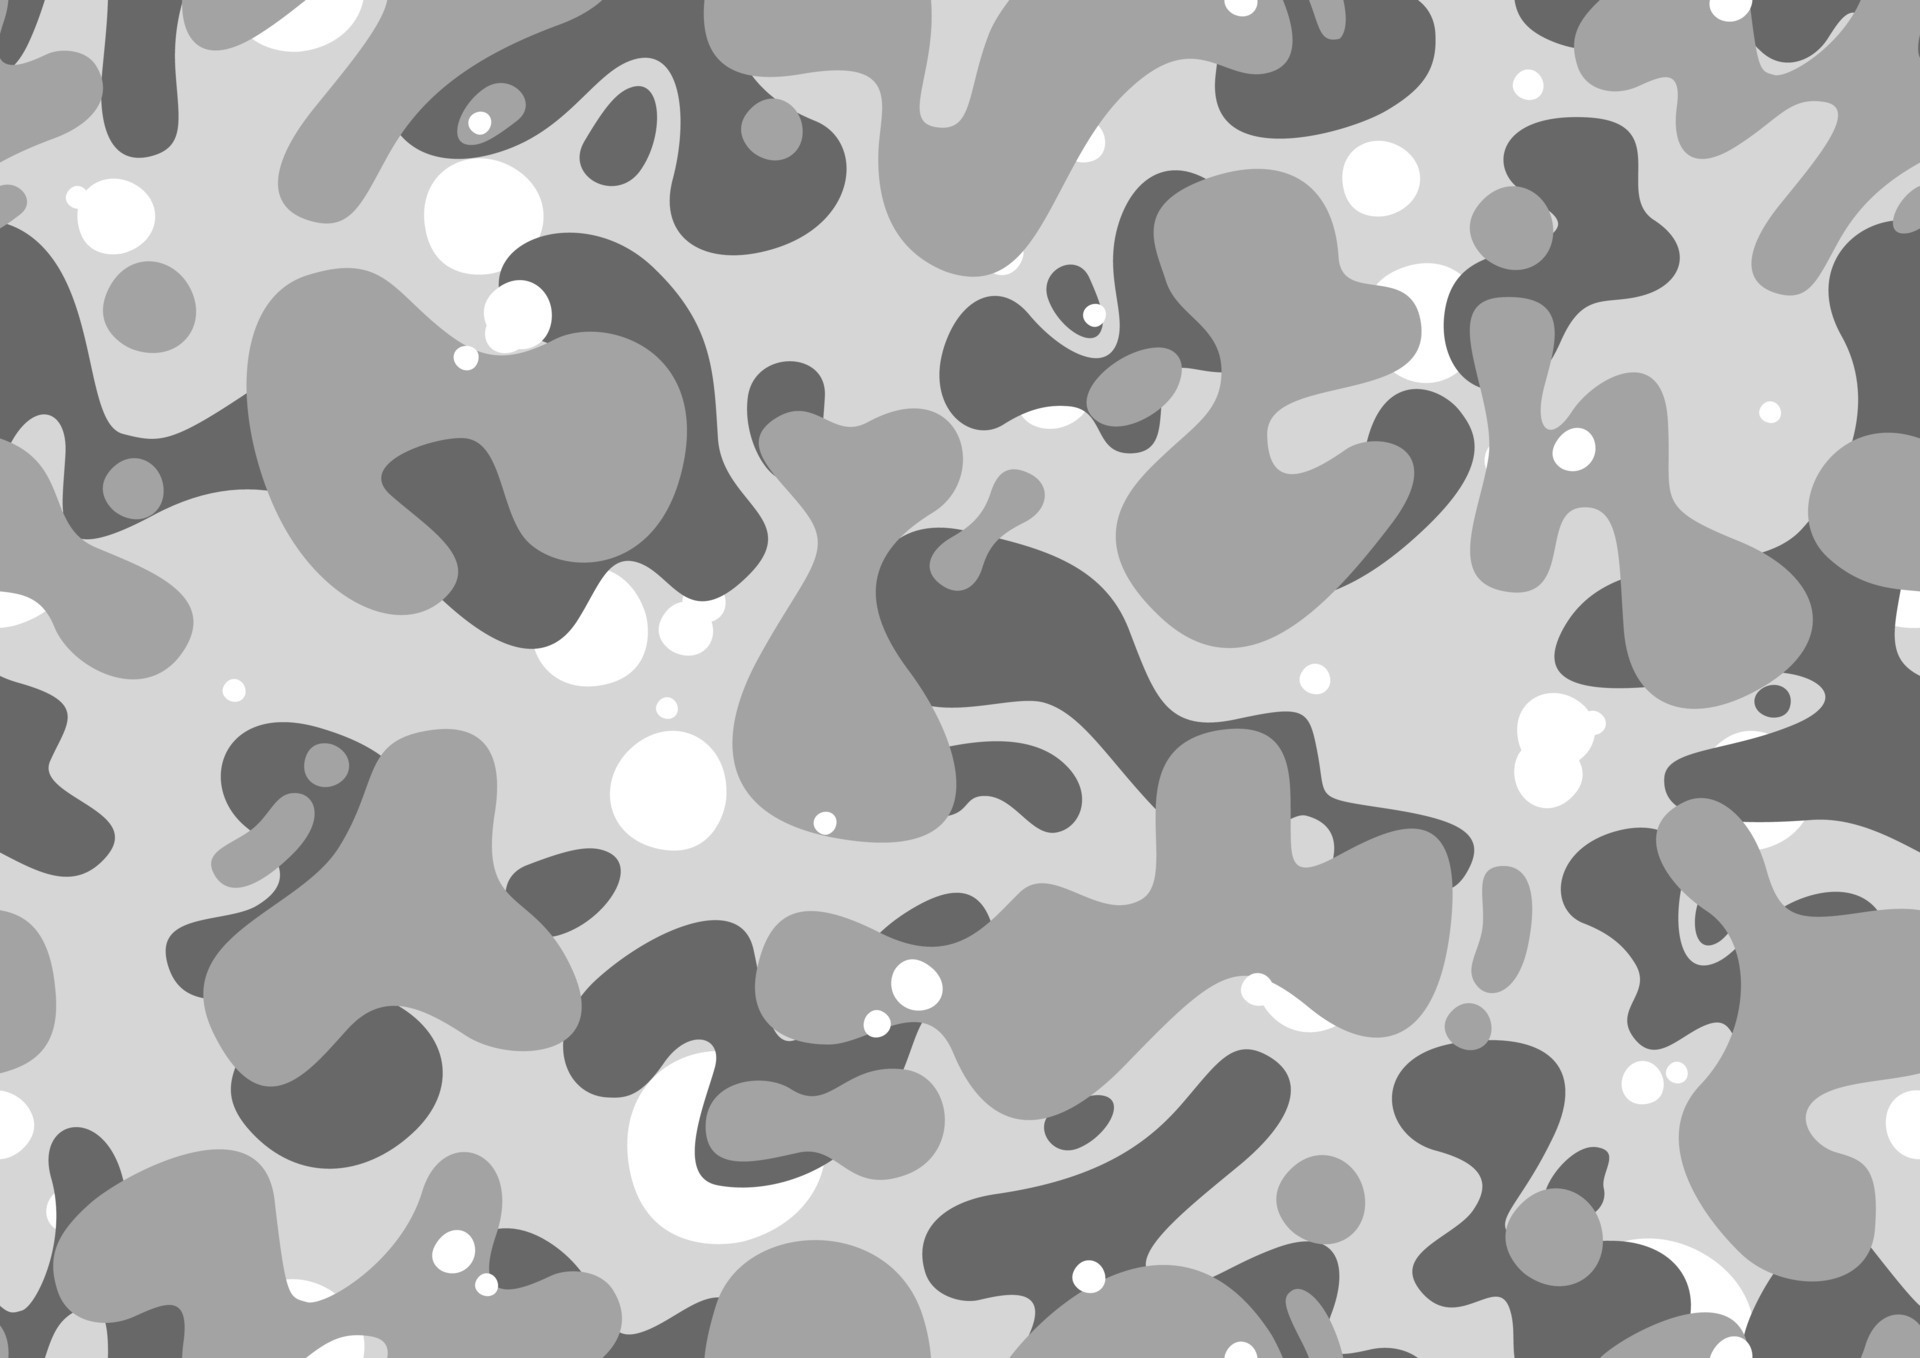 Washed out grayscale camouflage seamless pattern, editable eps